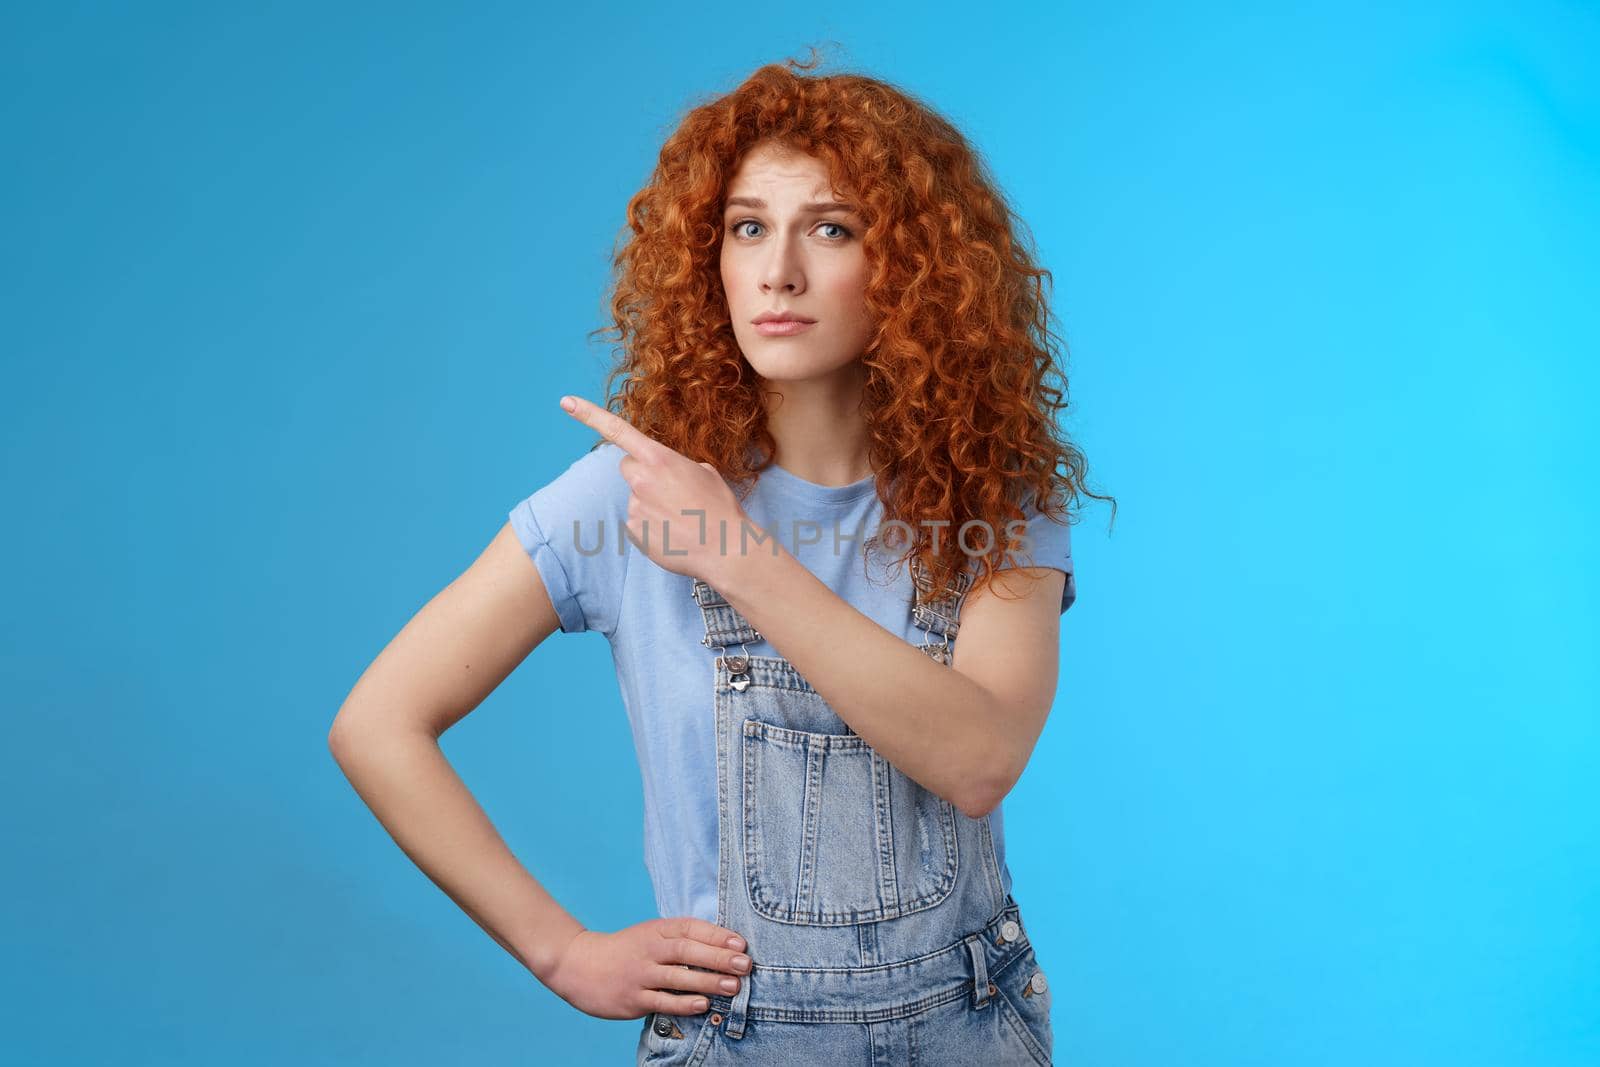 Unsure silly timid hesitant cute redhead curly-haired ginger girl frowning uncertain asking your opinion questioned look camera pointing upper left corner confused worried blue background.